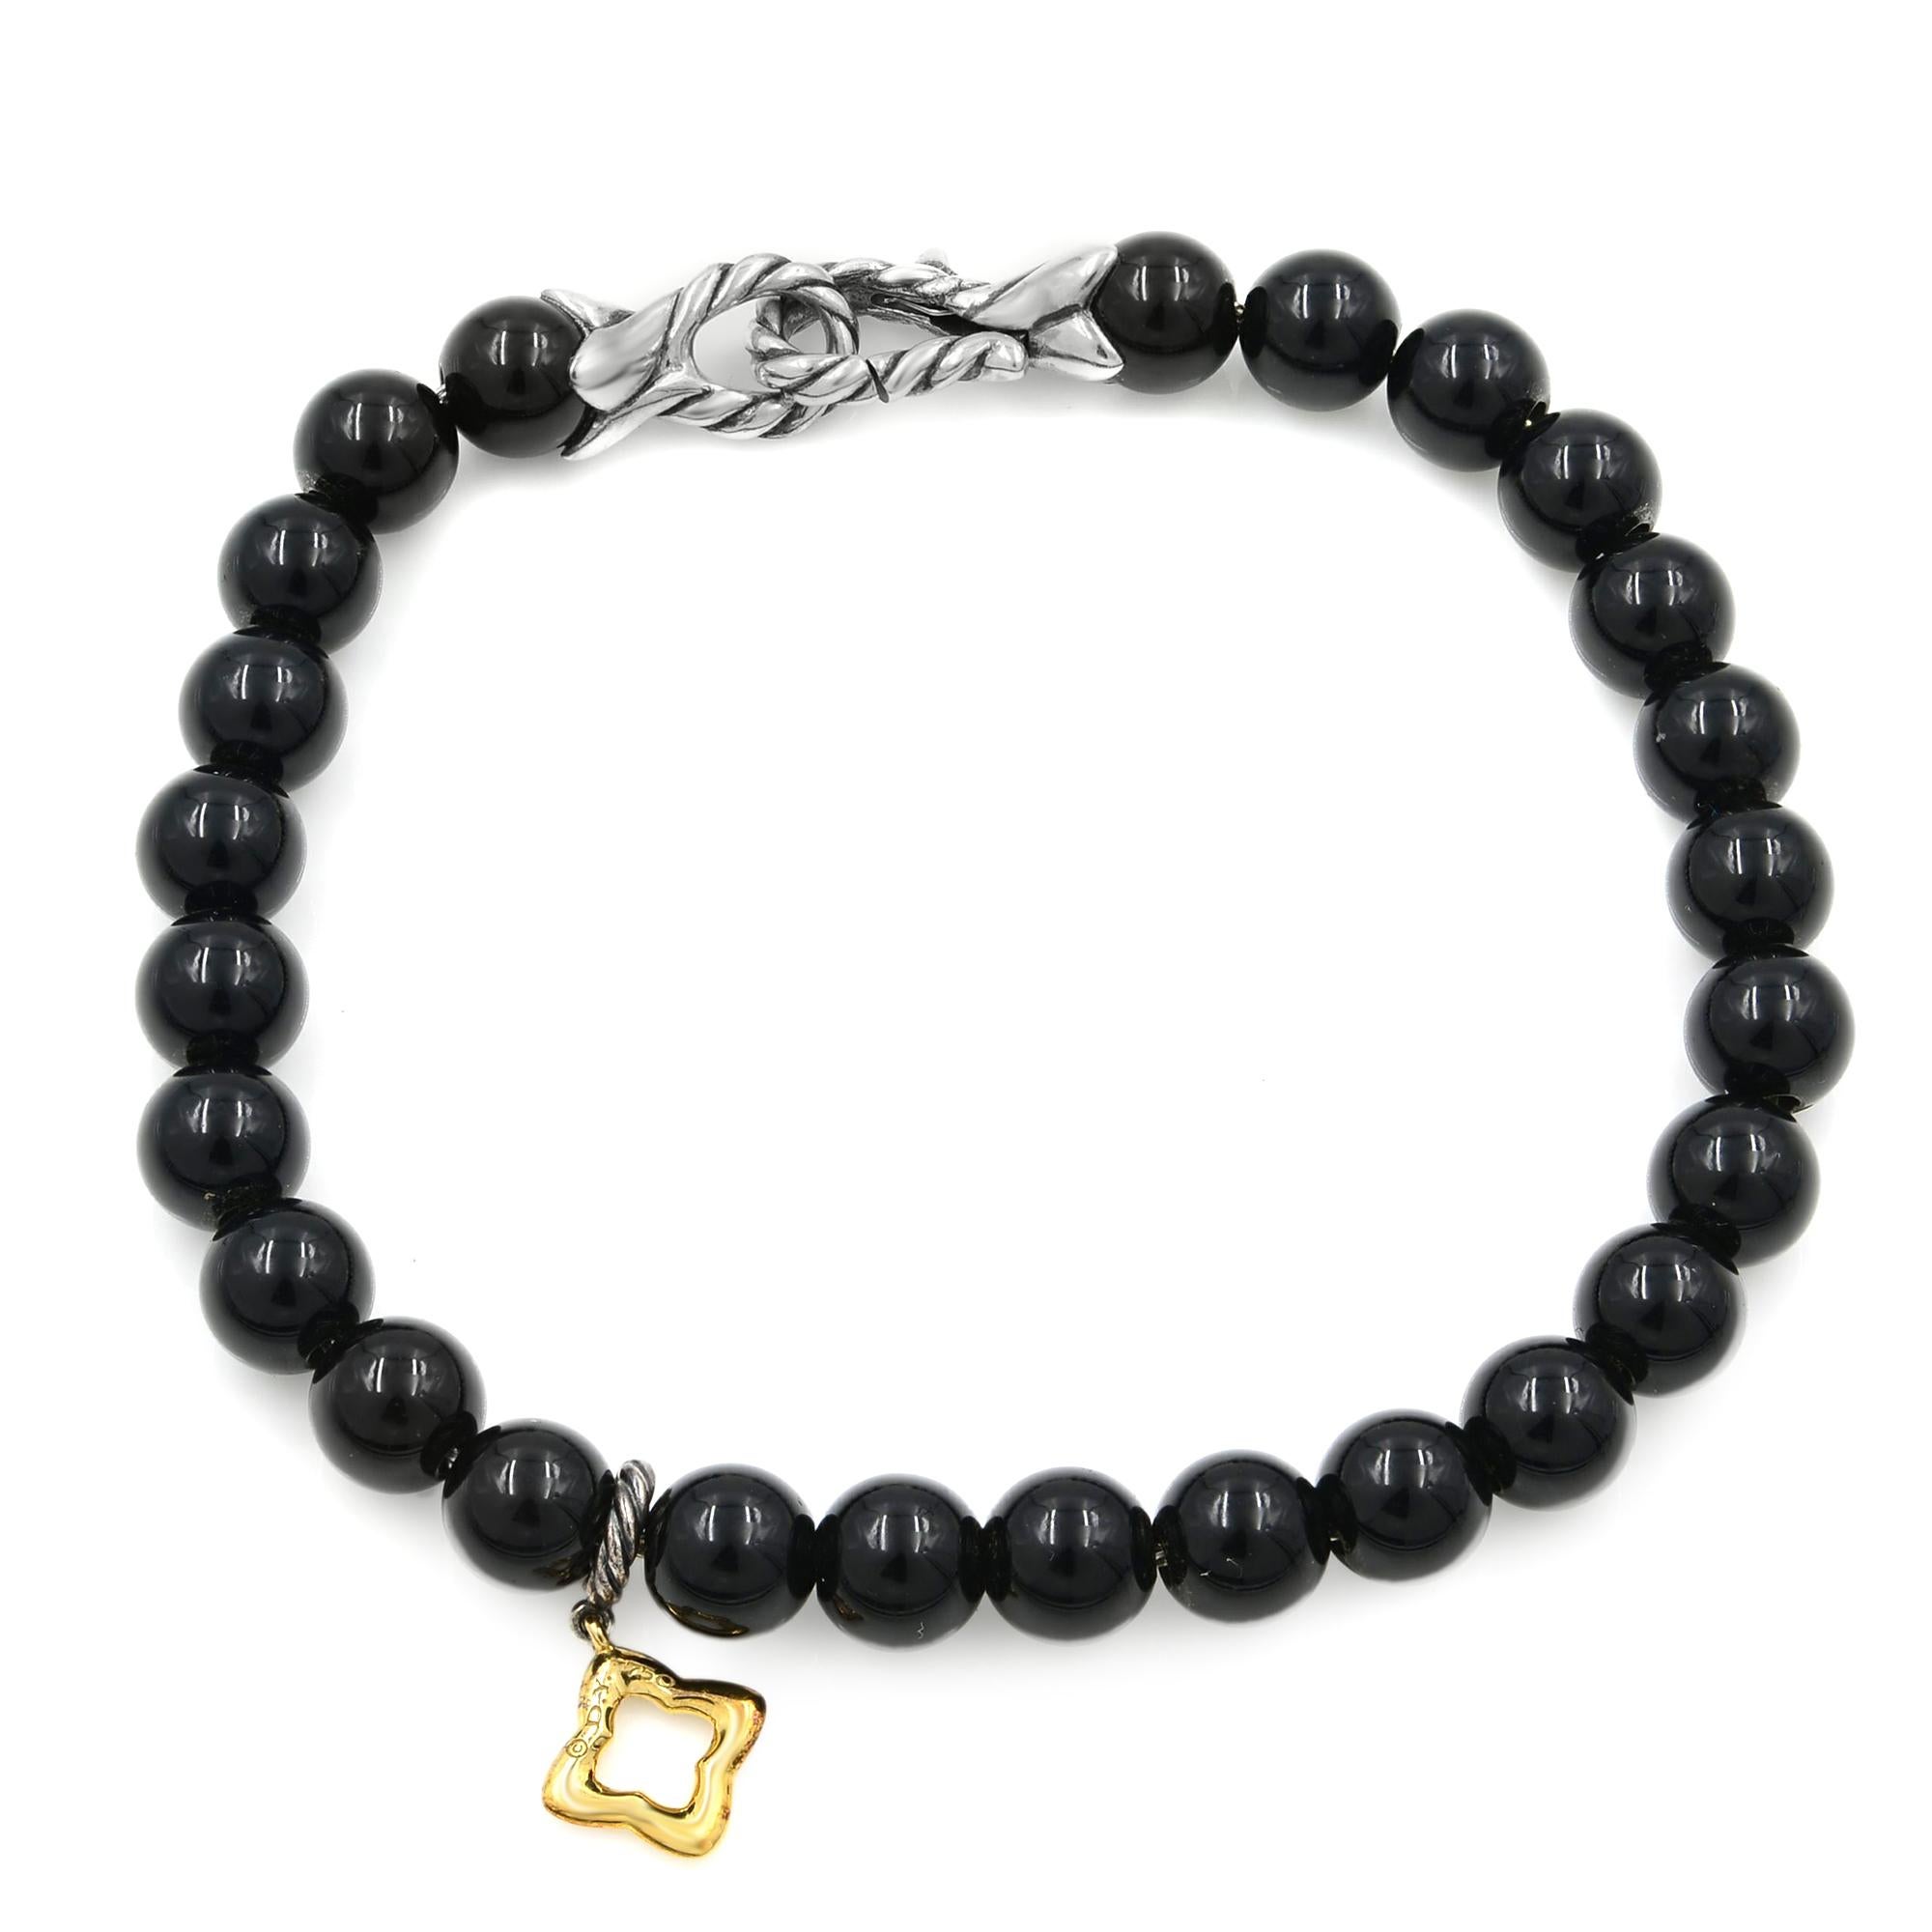 New Condition!
6mm Black Onyx Bracelet 7.5 inches with Gold Quatrefoil Charm
Sterling silver lobster claw lock marked with 